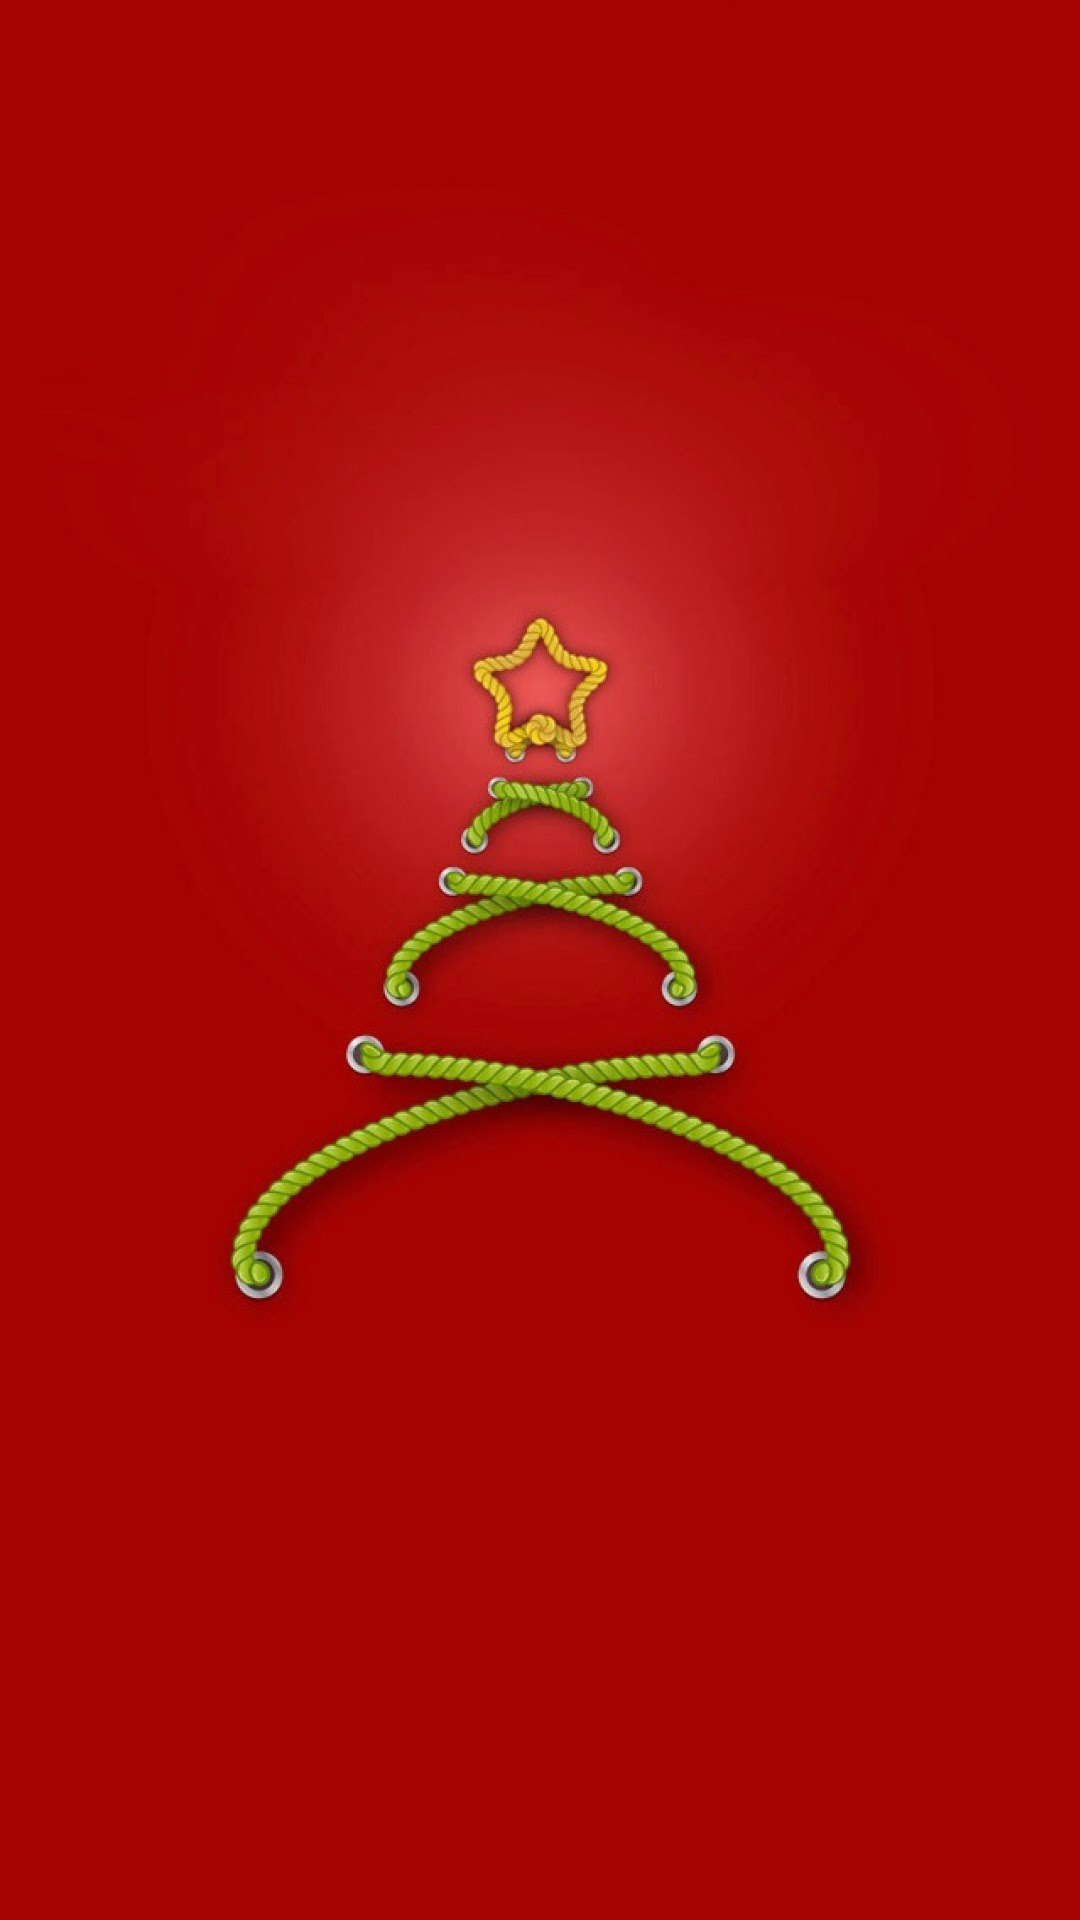 Christmas Wallpaper For iPhone And Plus iPhoneheat